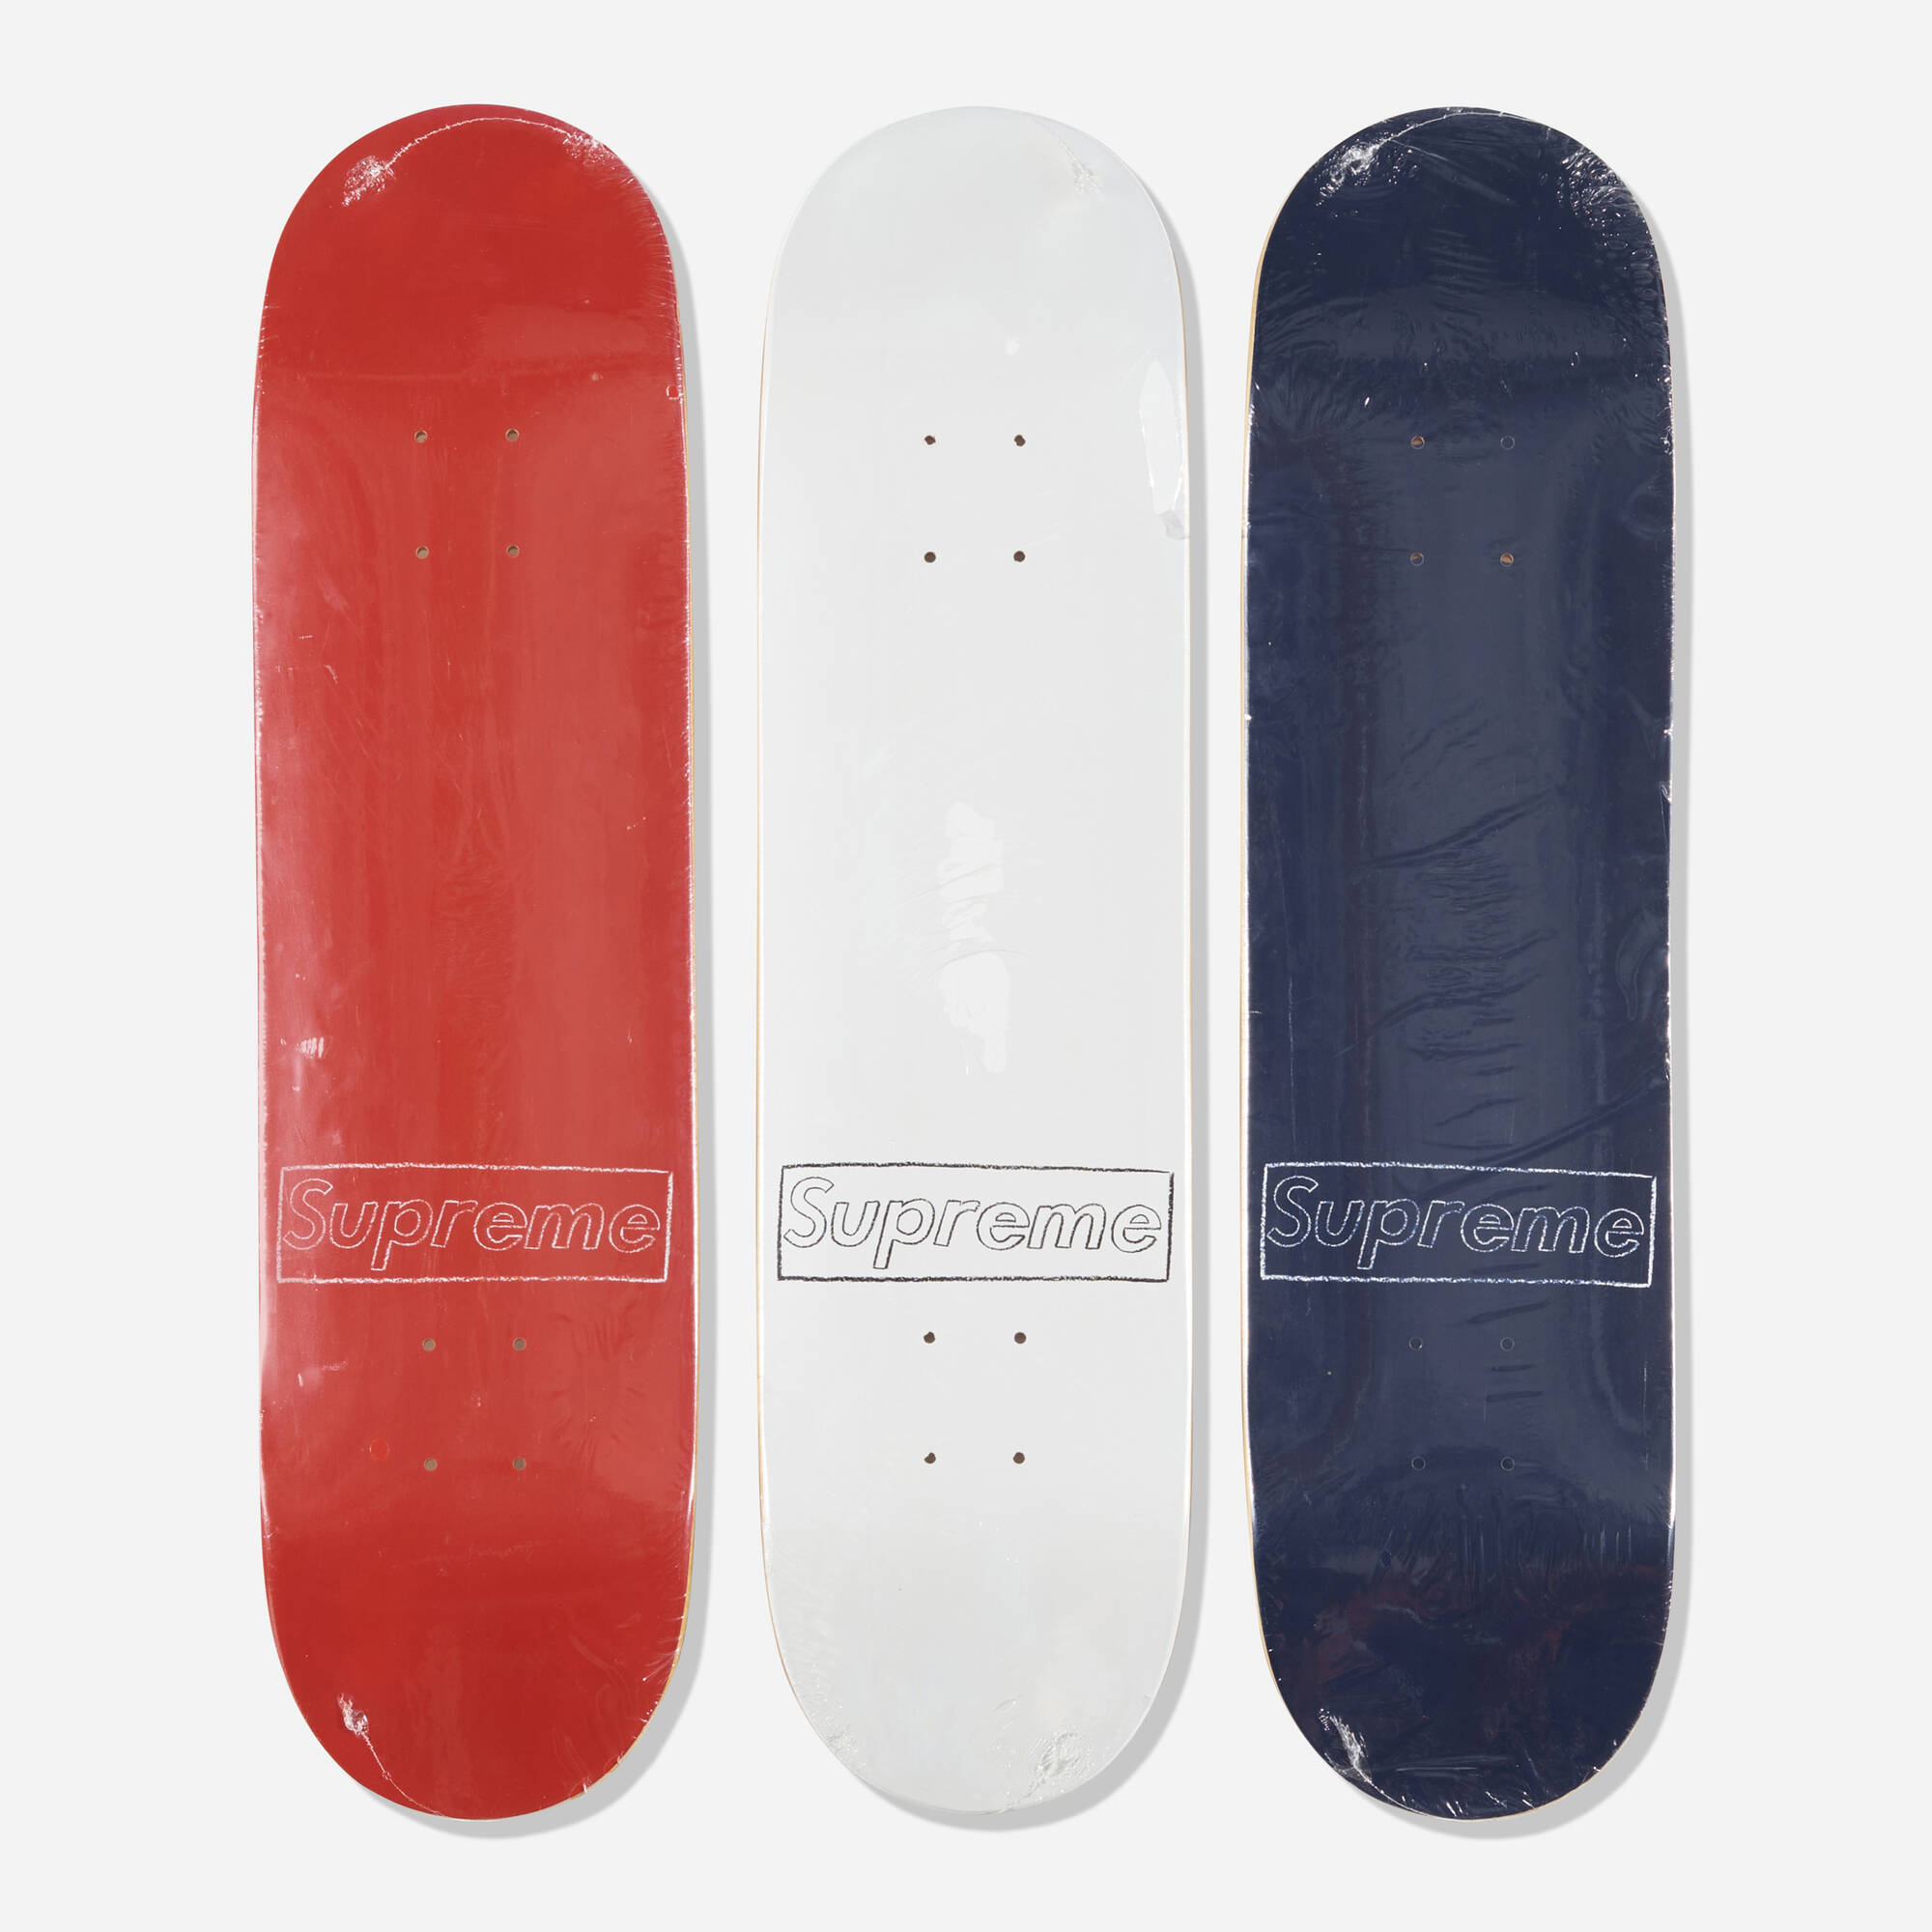 156: KAWS X SUPREME, Box Logo skateboard decks (Red, White and Blue) (three  works) < Unwrapped: Contemporary + Emerging Art, 9 September 2022 <  Auctions